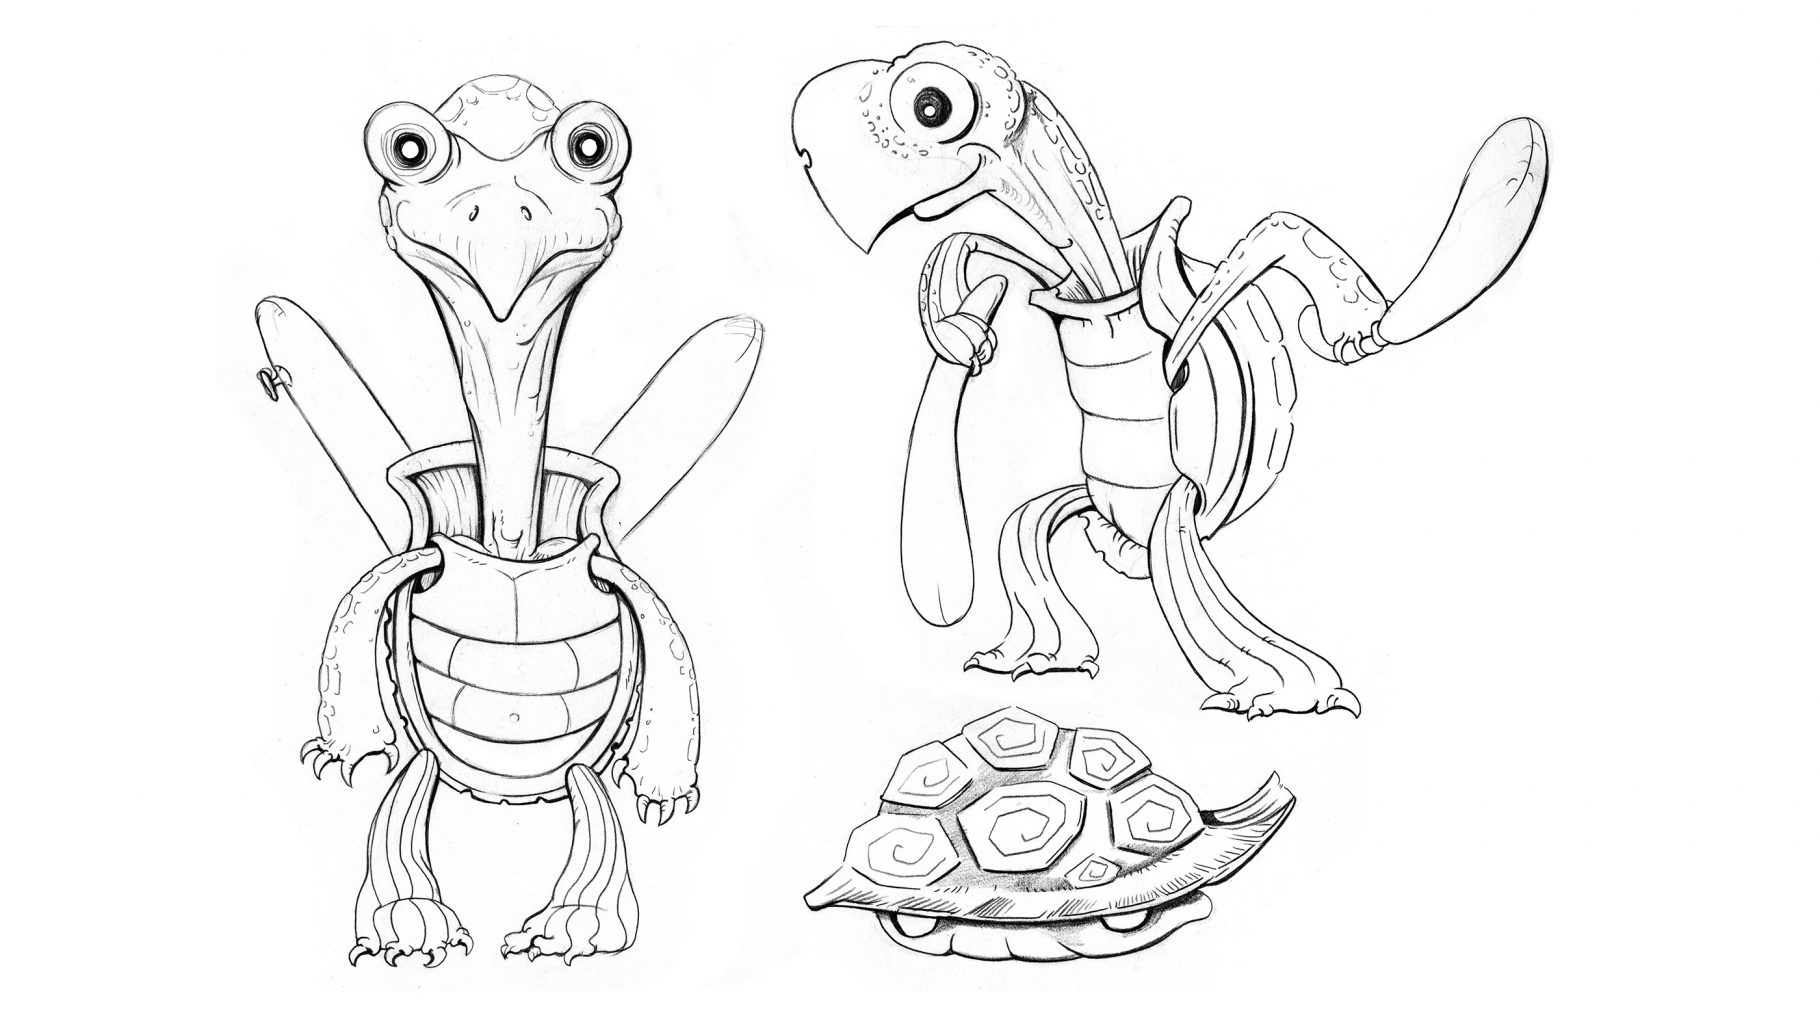 Turtle | Character Design Sheet | Character Design Inspiration | Character Model Sheet | Character Inspiration